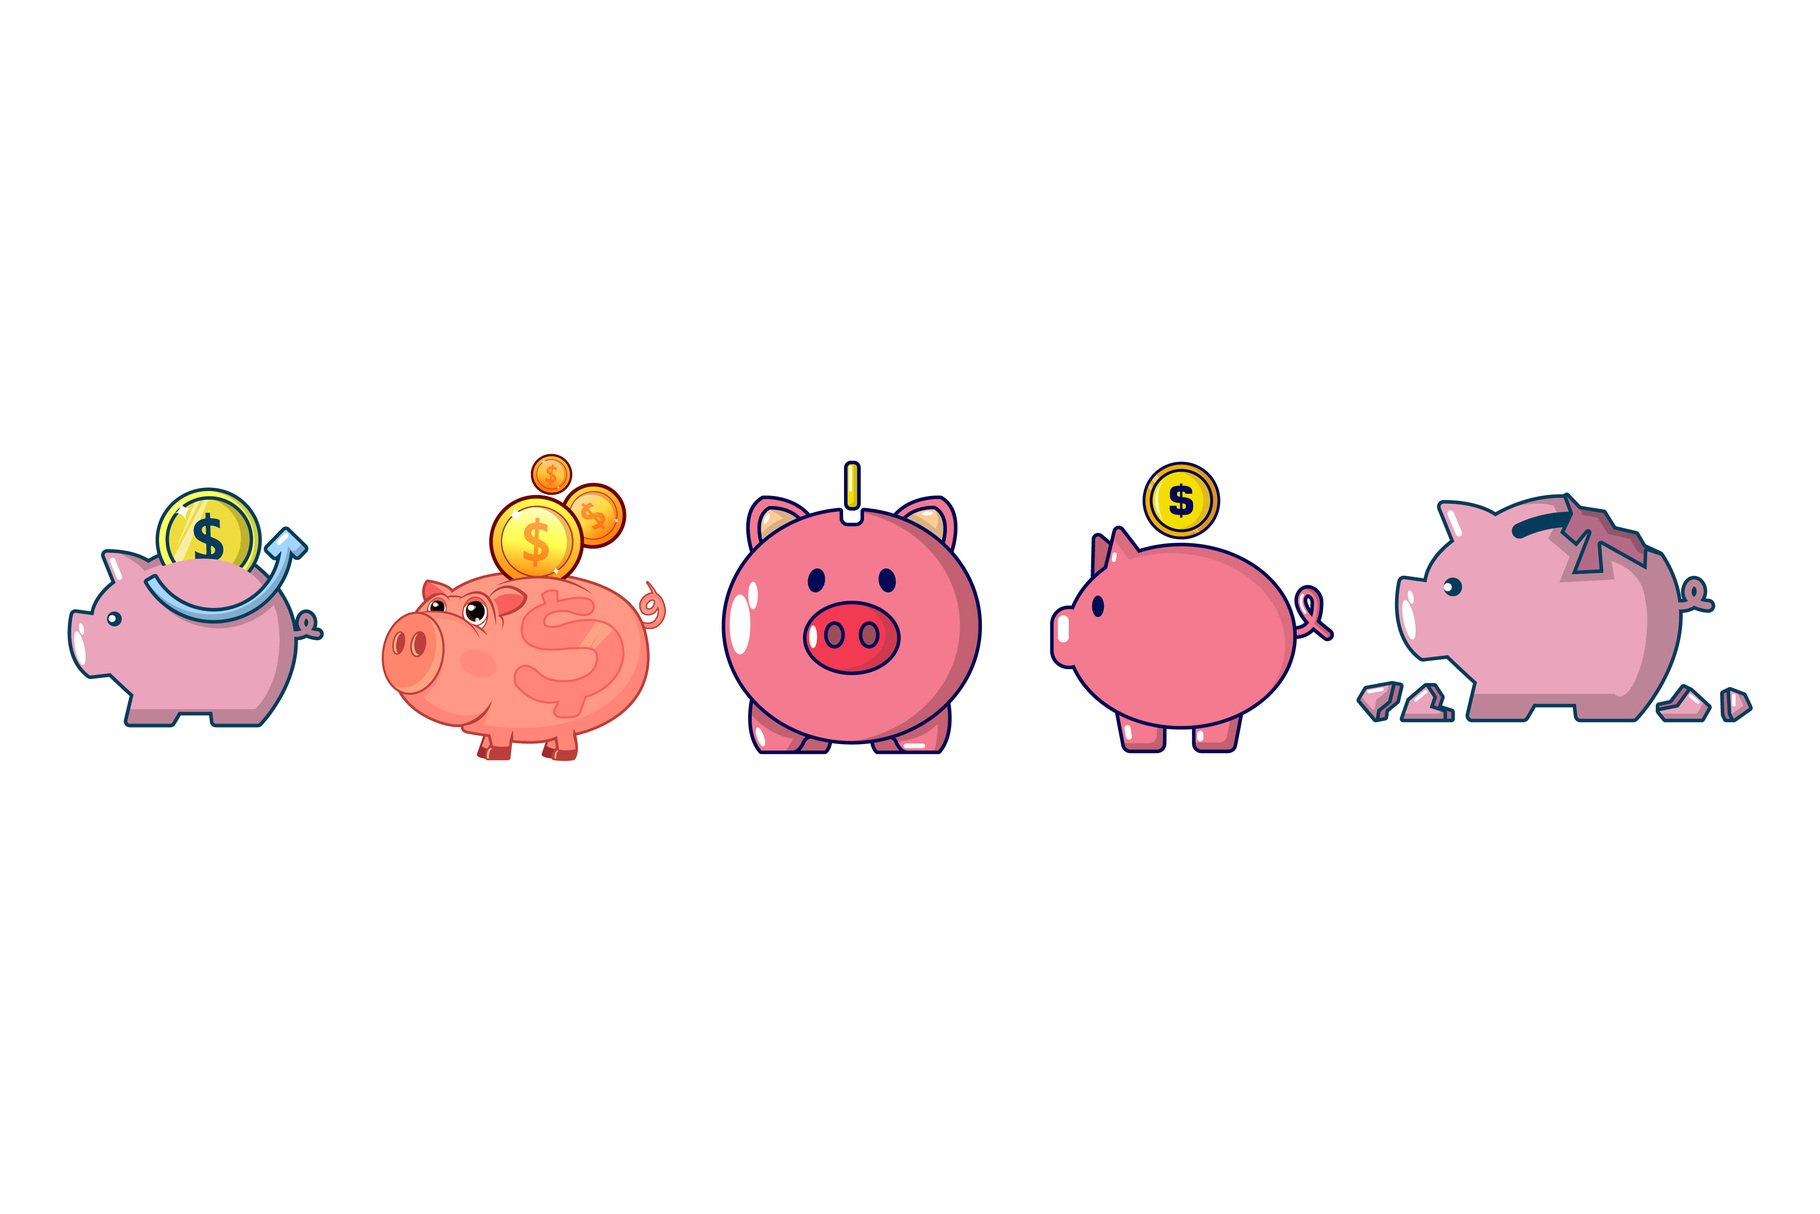 A row of piggy banks in different colors.